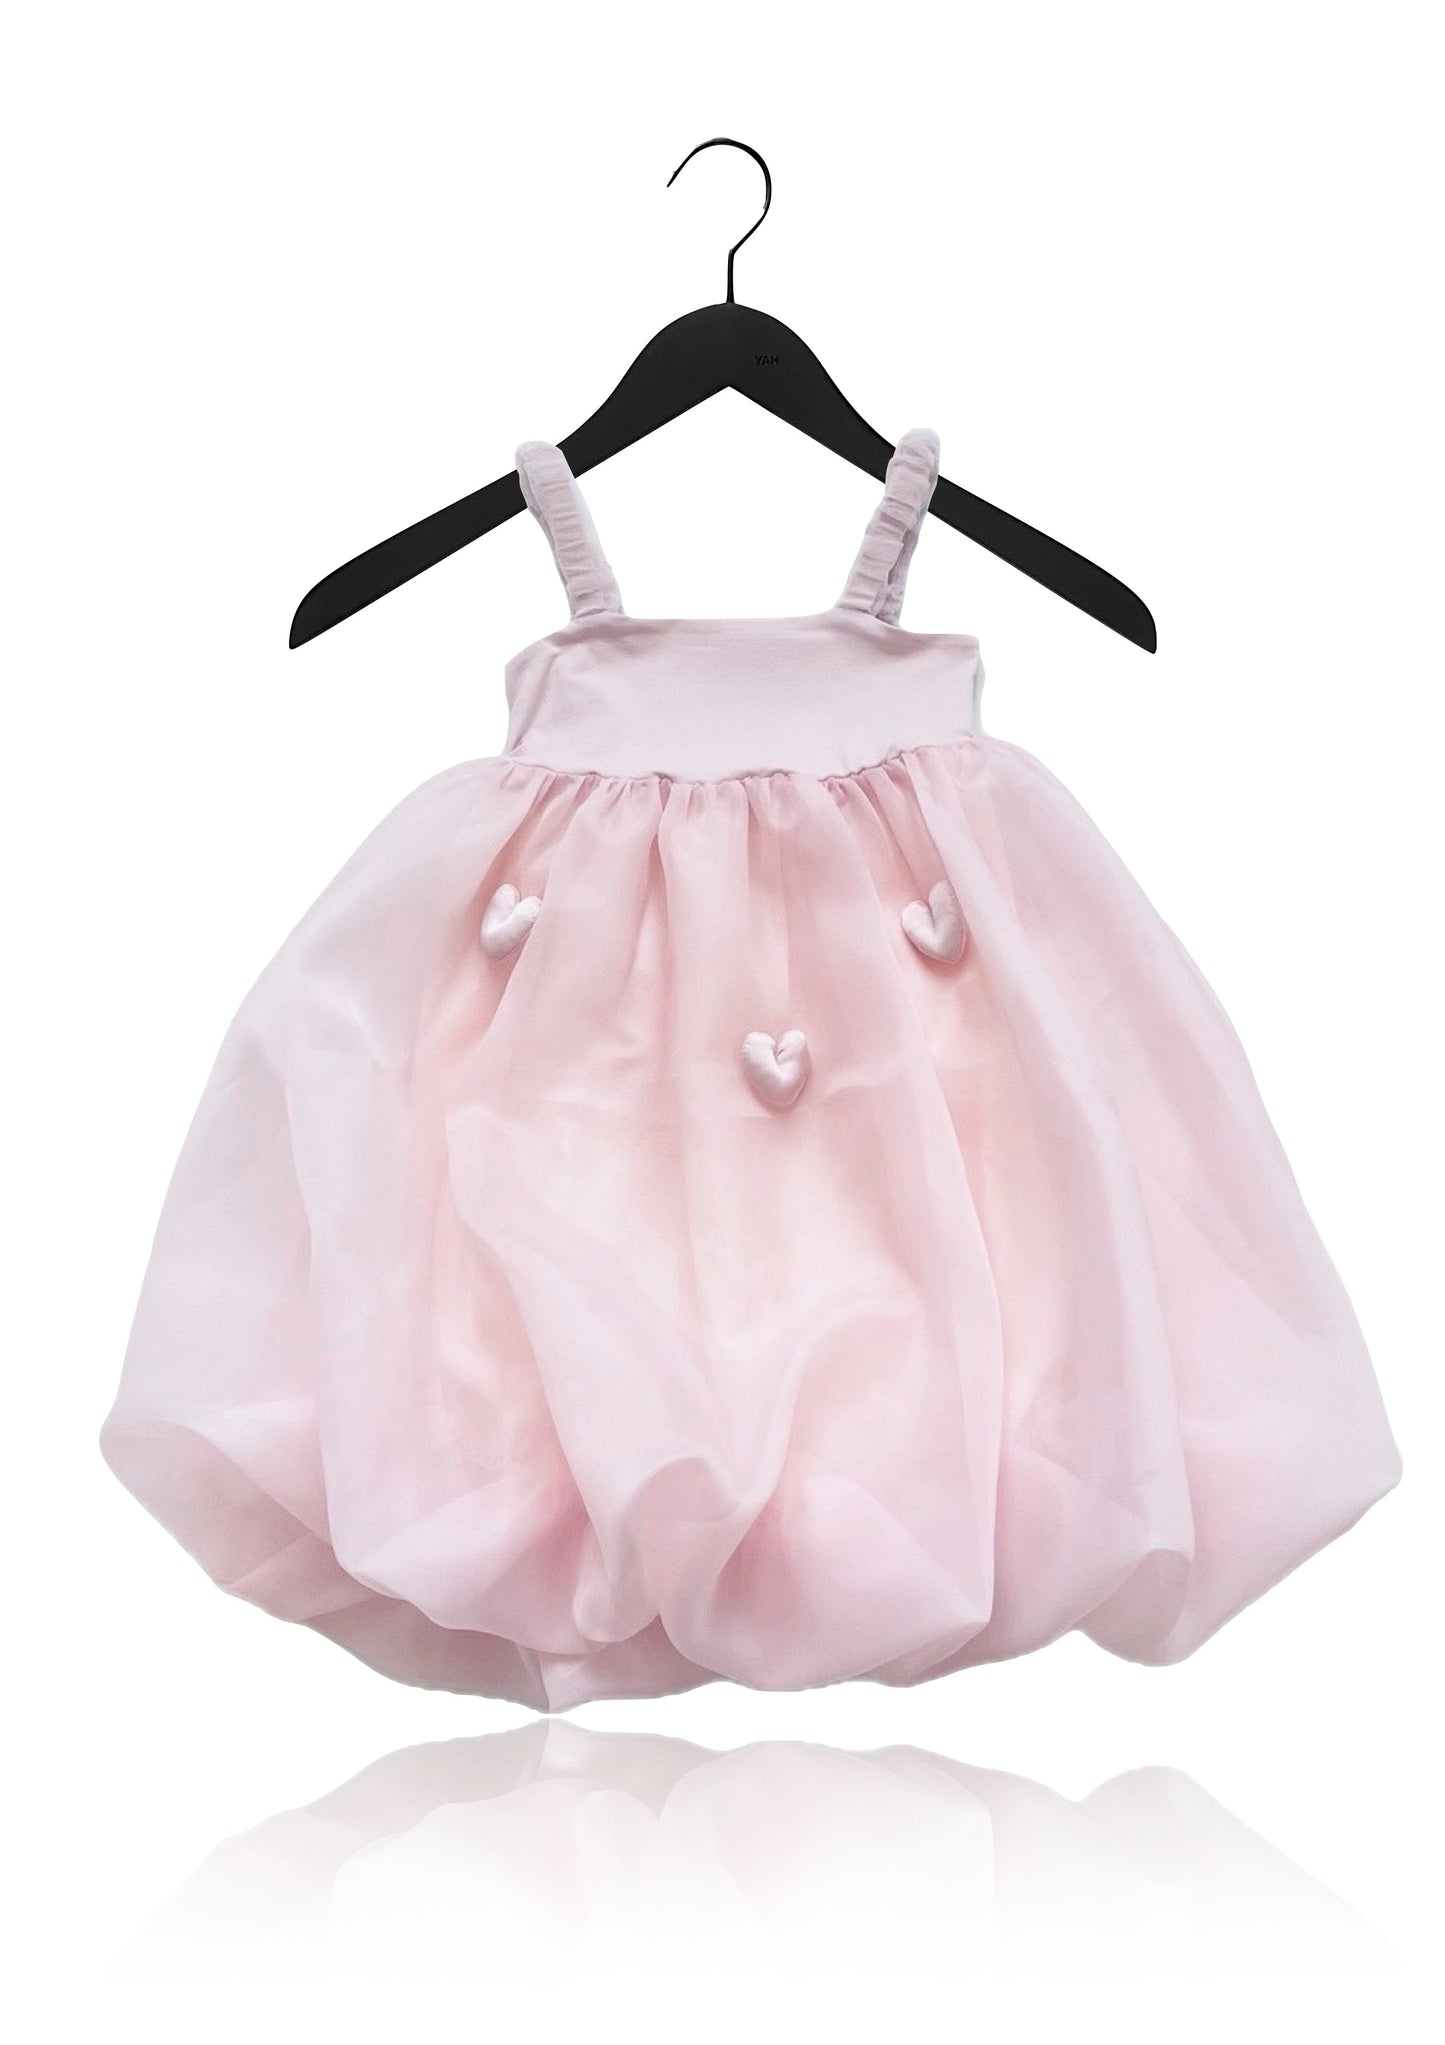 DOLLY WORLD HEART BALLOON ORGANZA DRESS WITH COTTON BODY dollypink